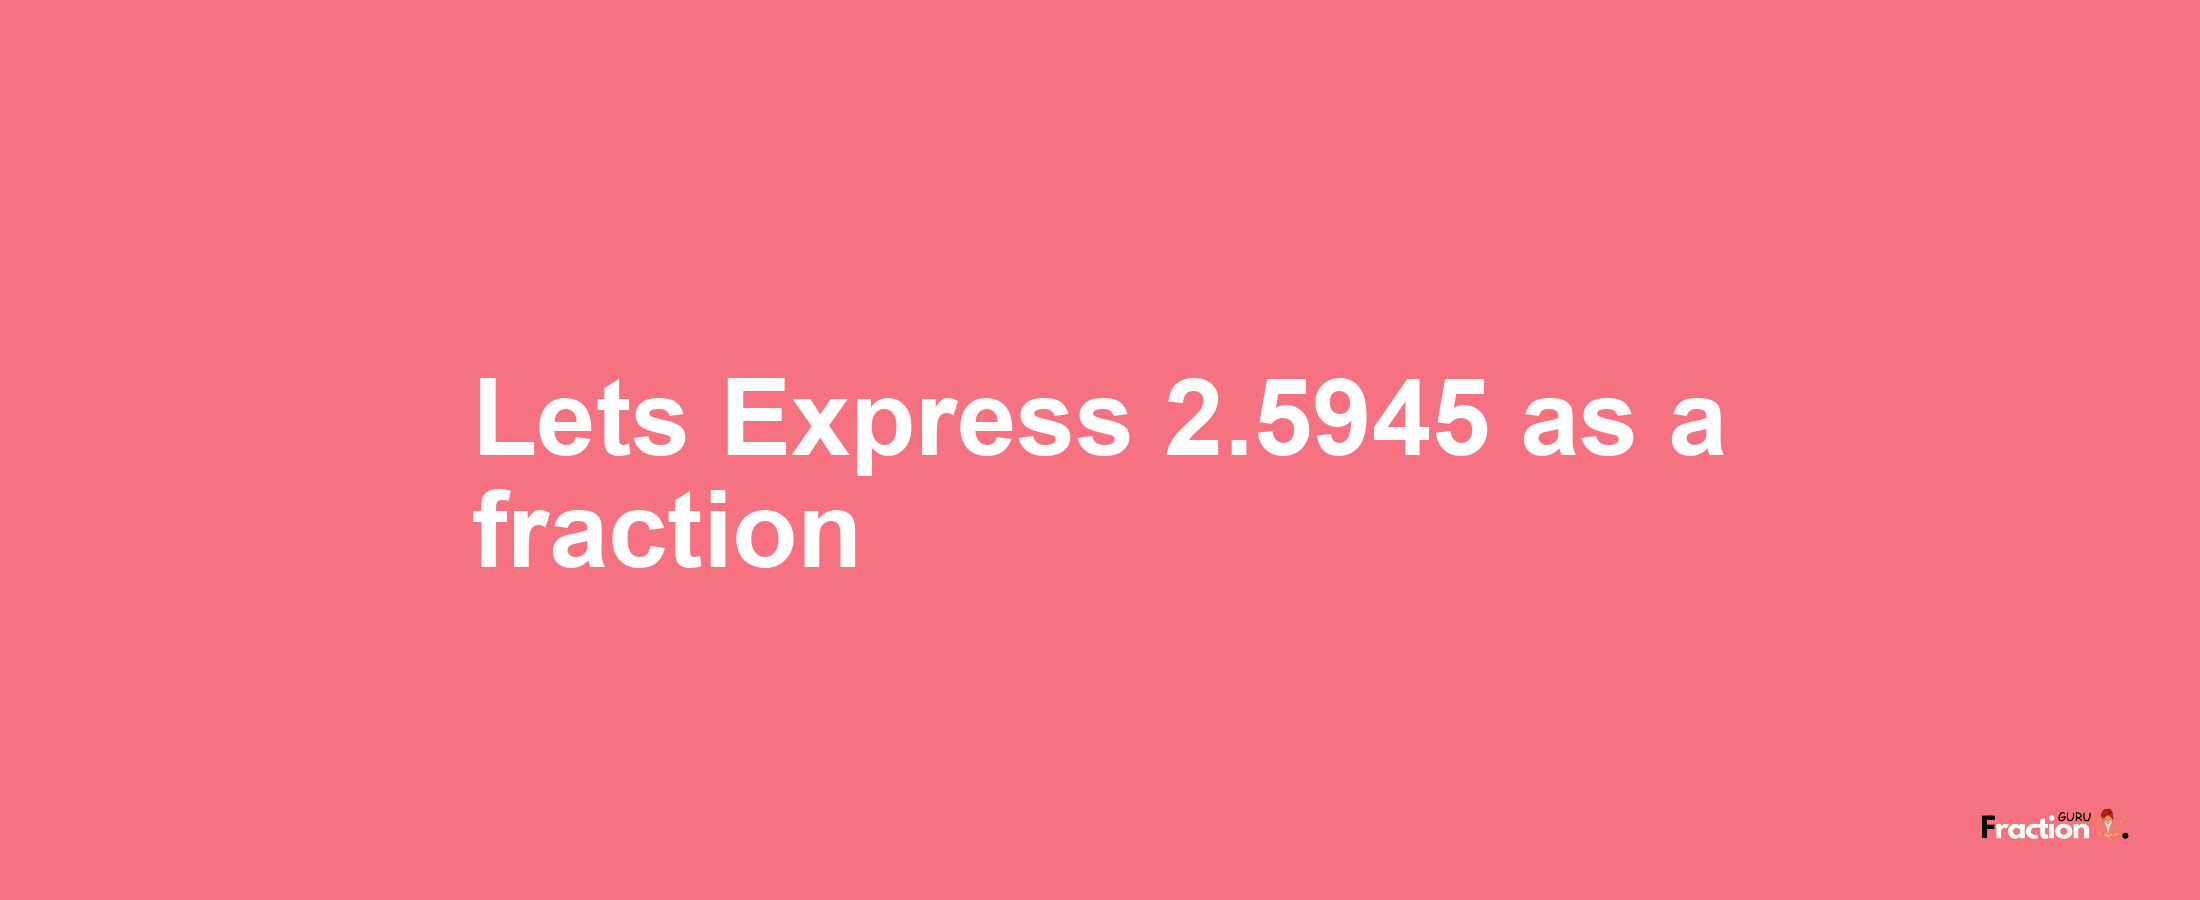 Lets Express 2.5945 as afraction